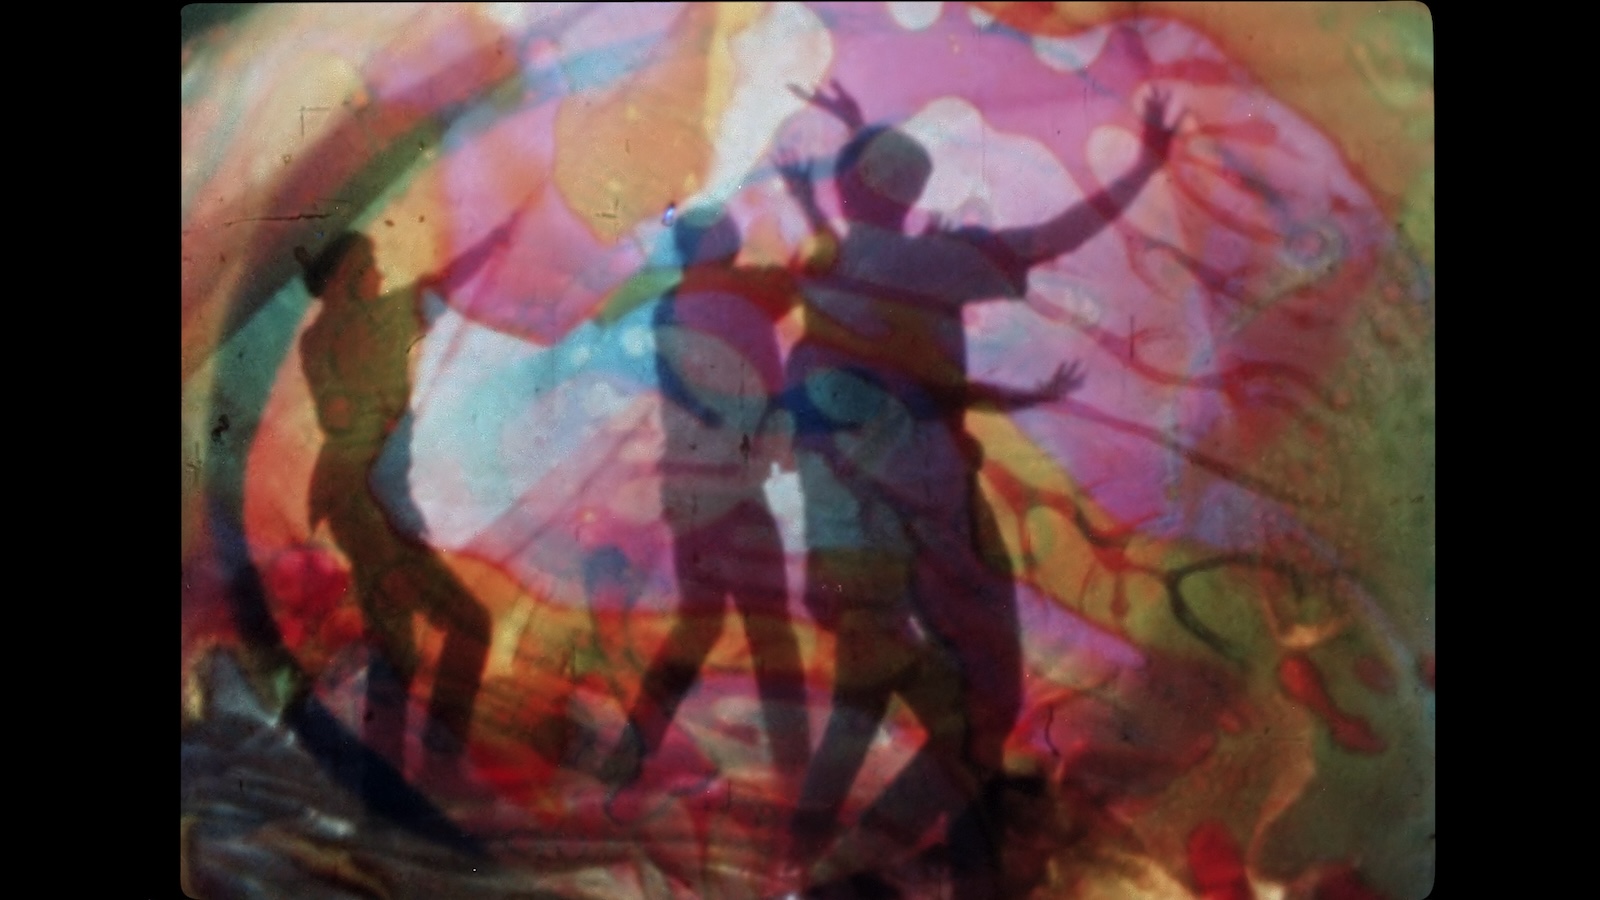 Silhouettes of people dancing against psychedelic color bubbles